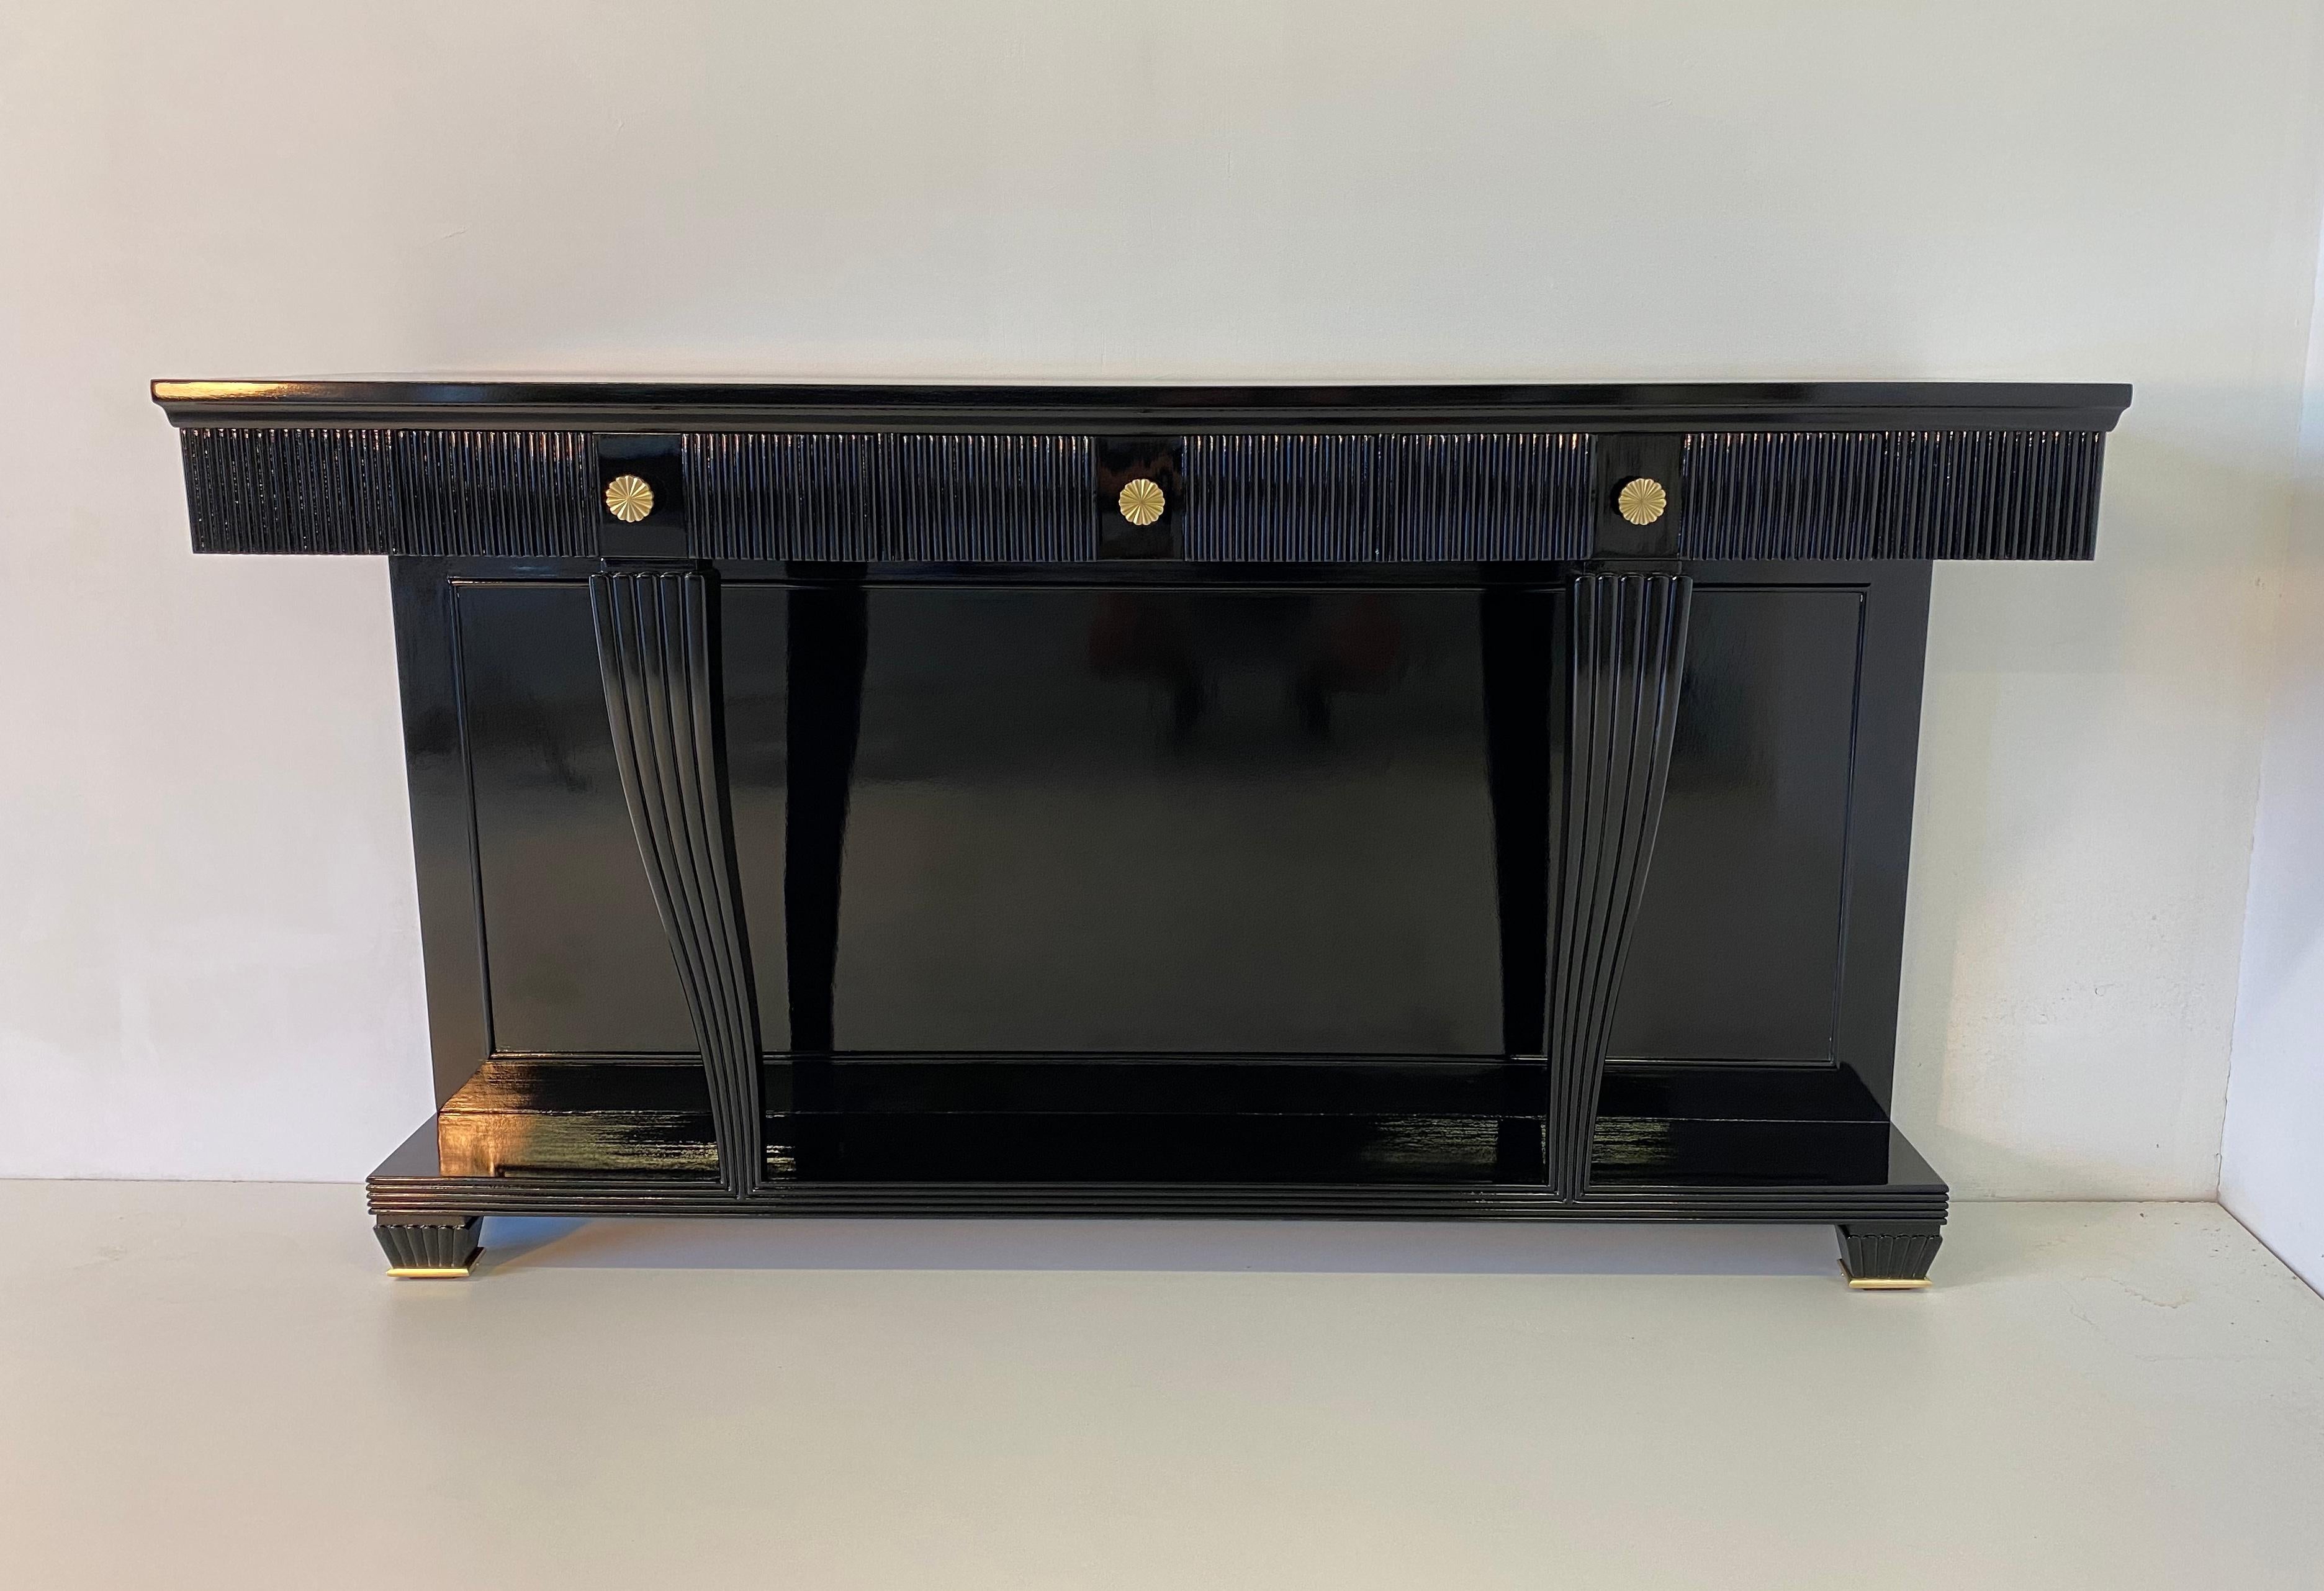 This precious console was produced in Italy in the 1940s and it is completely black lacquered with brass details.
The interiors are in walnut.
The console has the original attachments to be able to fix it to the wall.
Completely restored.